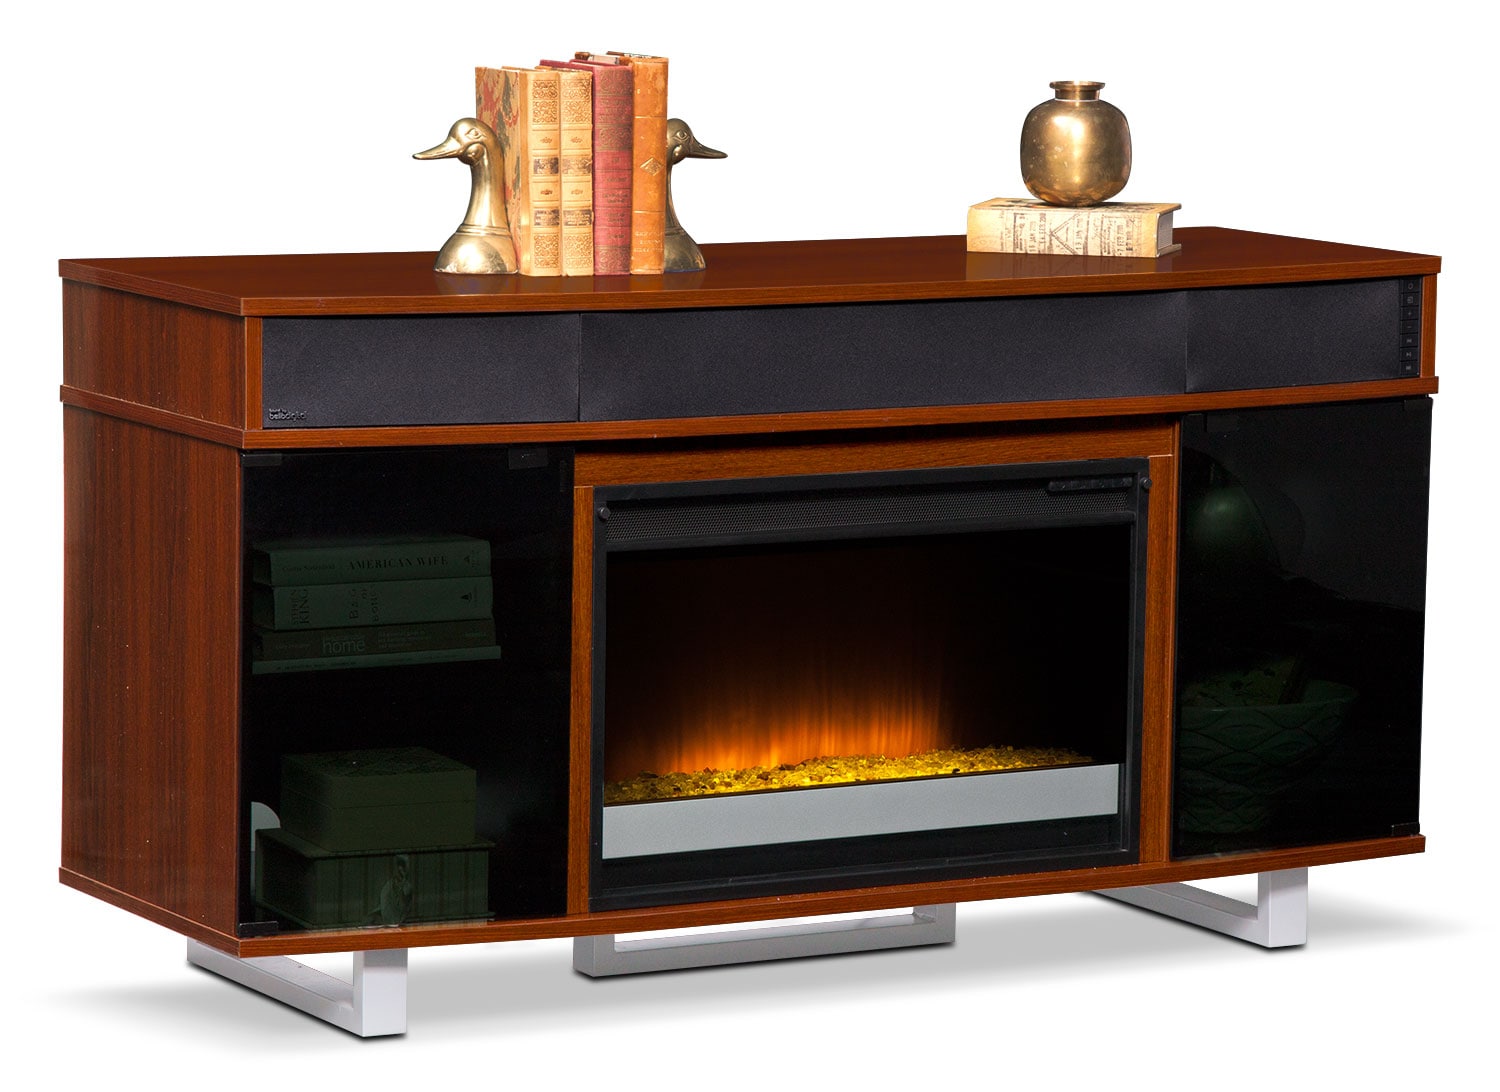 Pacer 56" Contemporary Fireplace TV Stand with Sound Bar